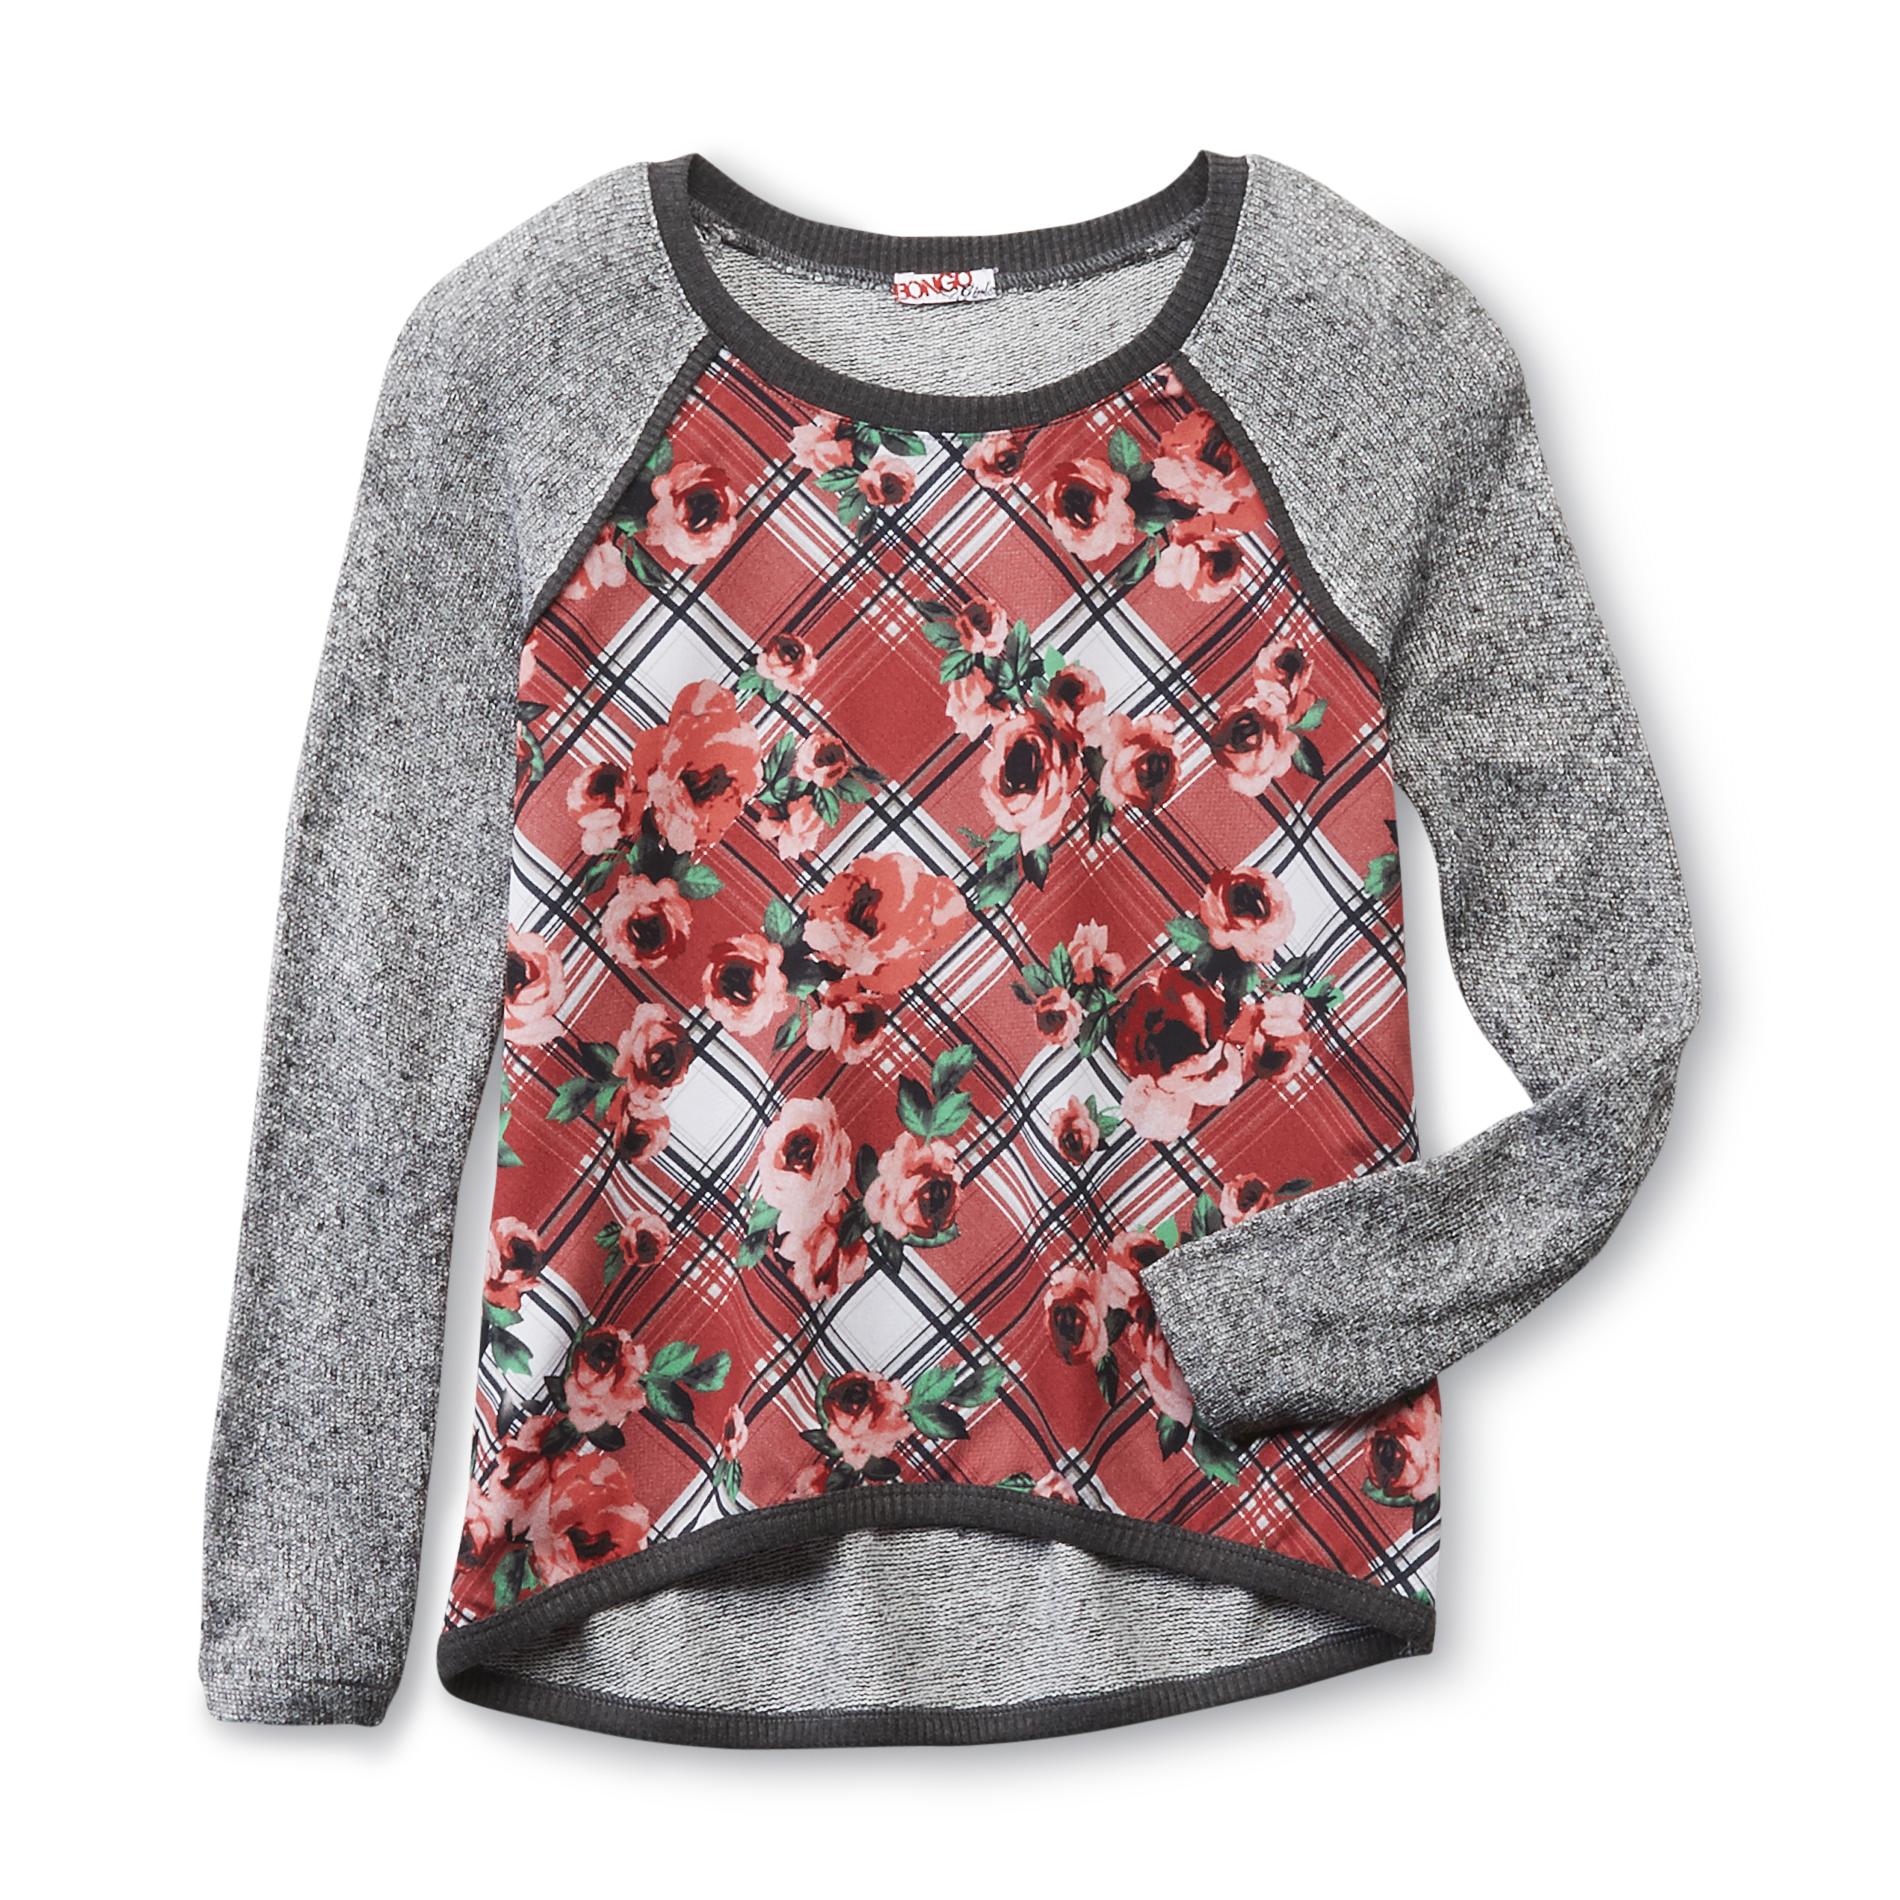 Bongo Girl's Mixed Media Sweater - Floral & Plaid